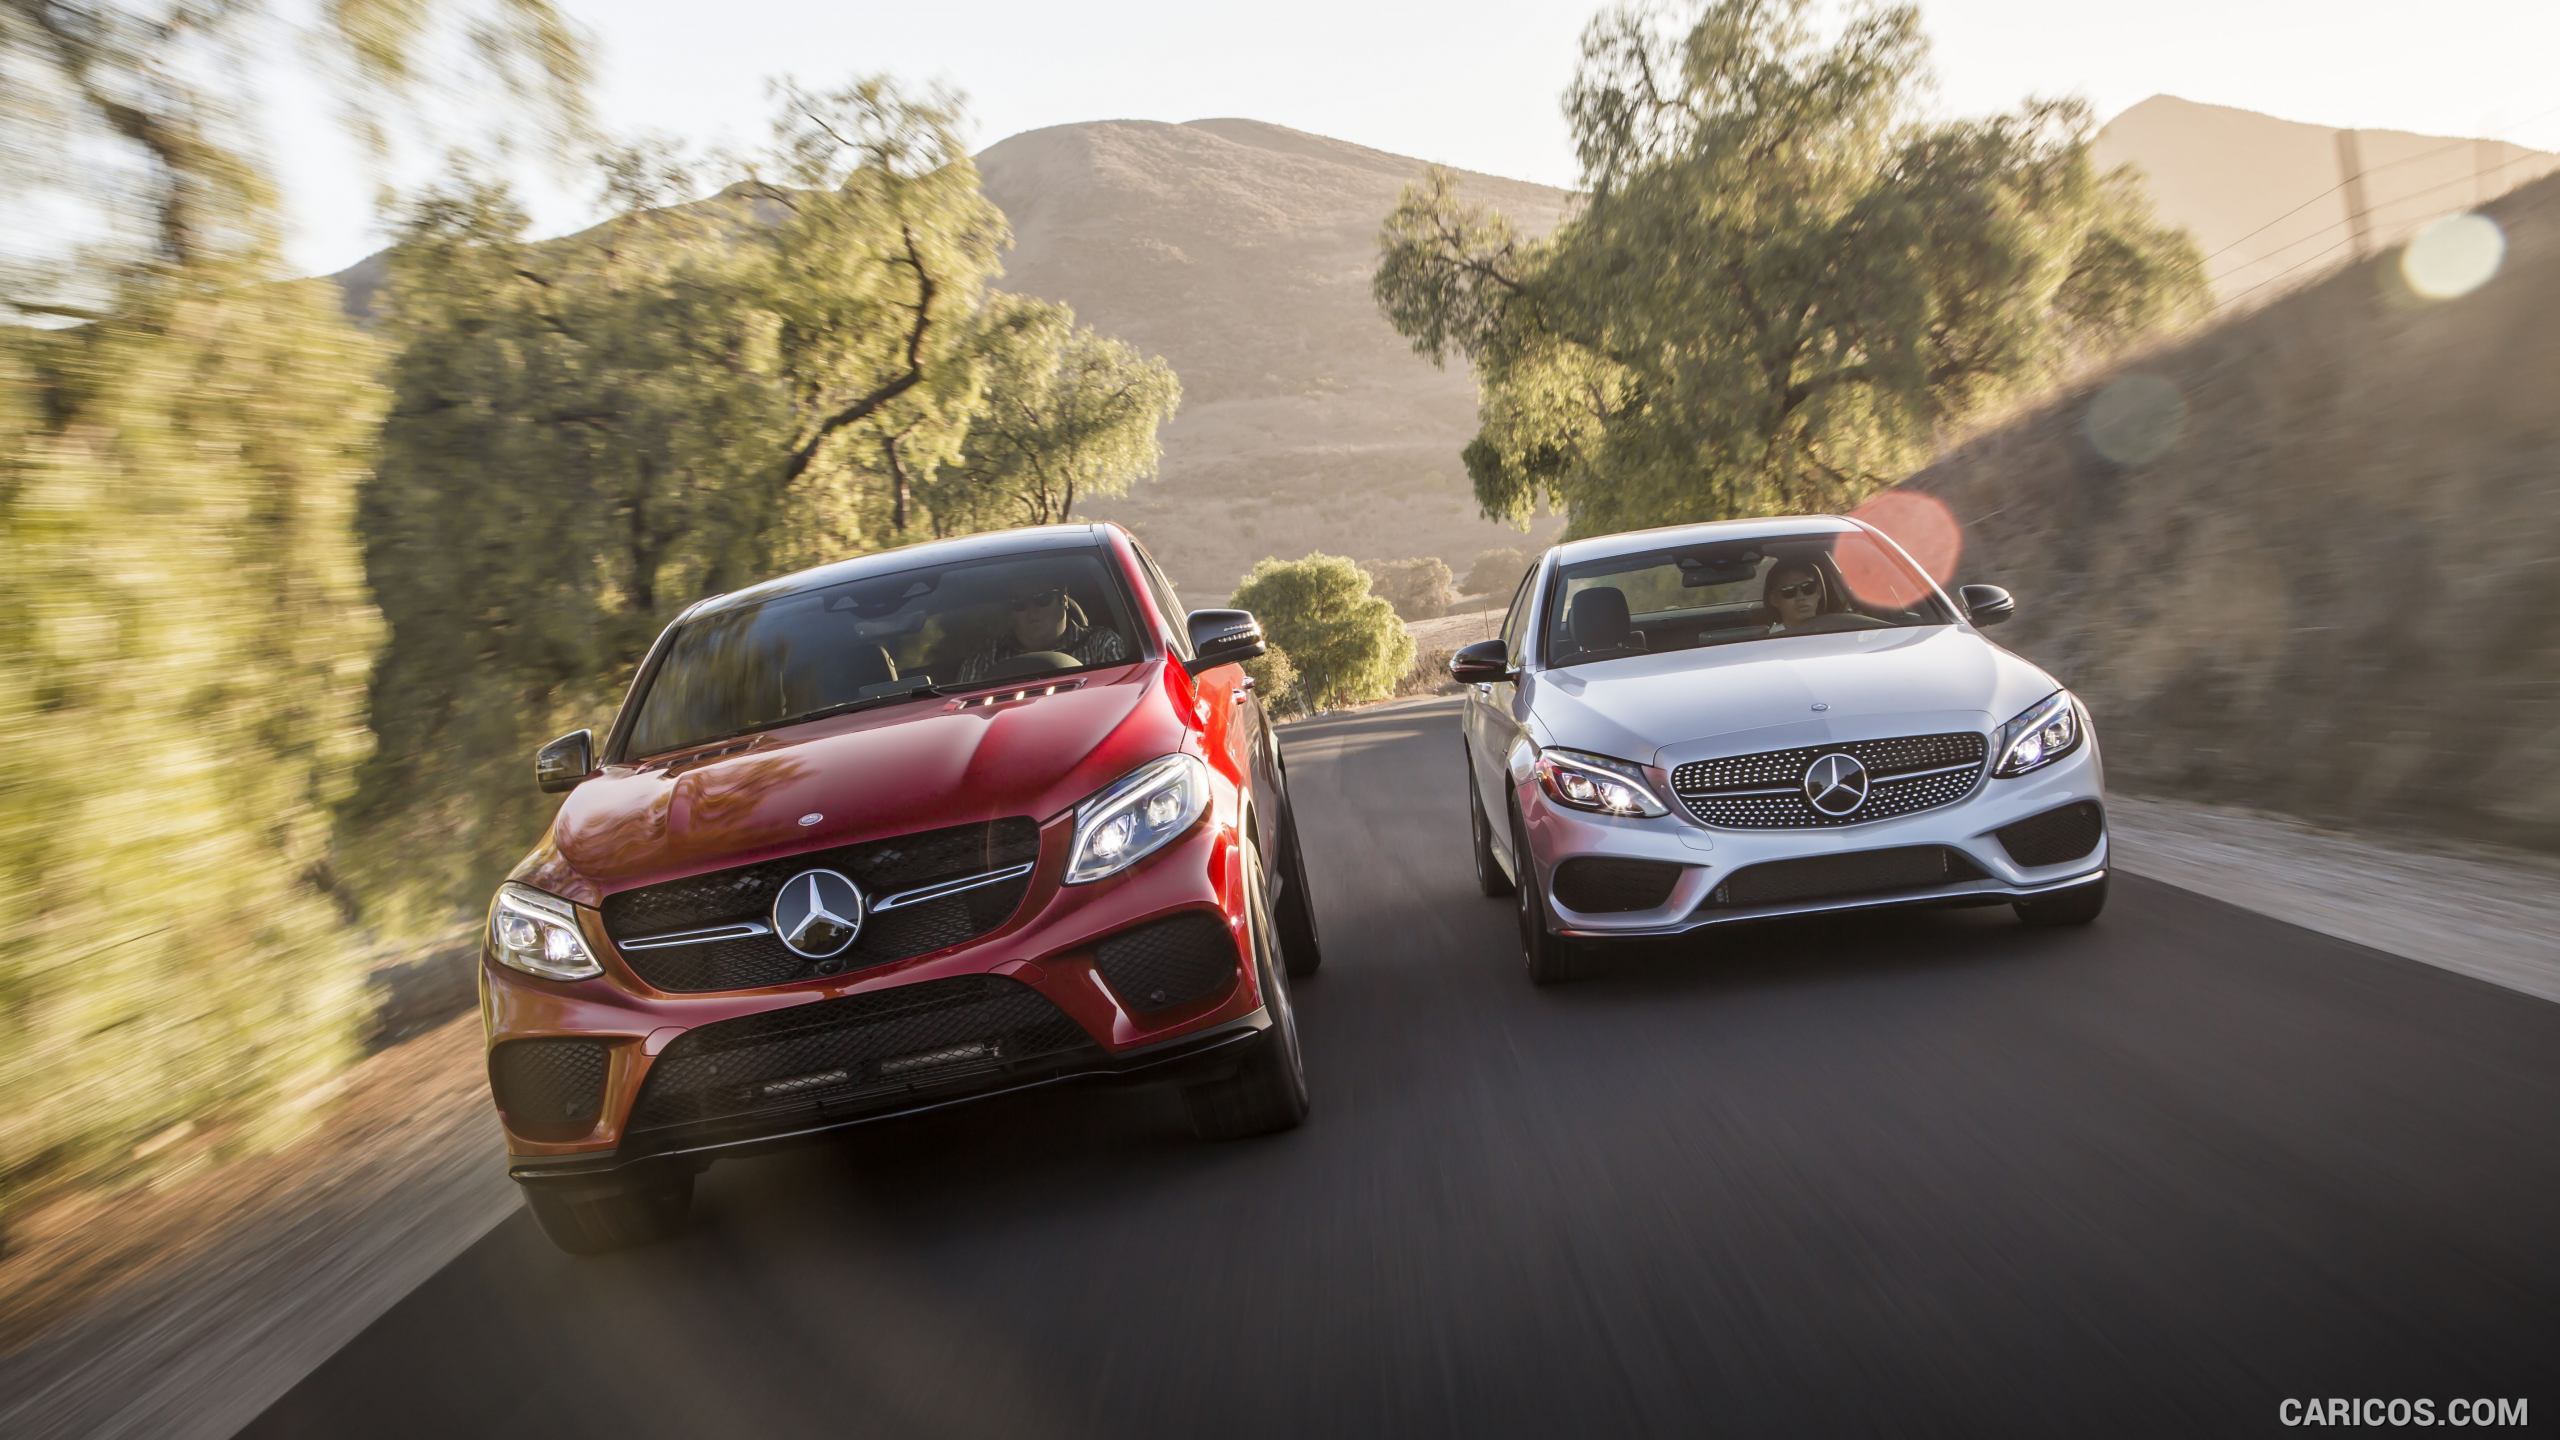 2016 Mercedes-Benz GLE 450 AMG Coupe 4MATIC (US-Spec) and C450 AMG - Front, #101 of 115